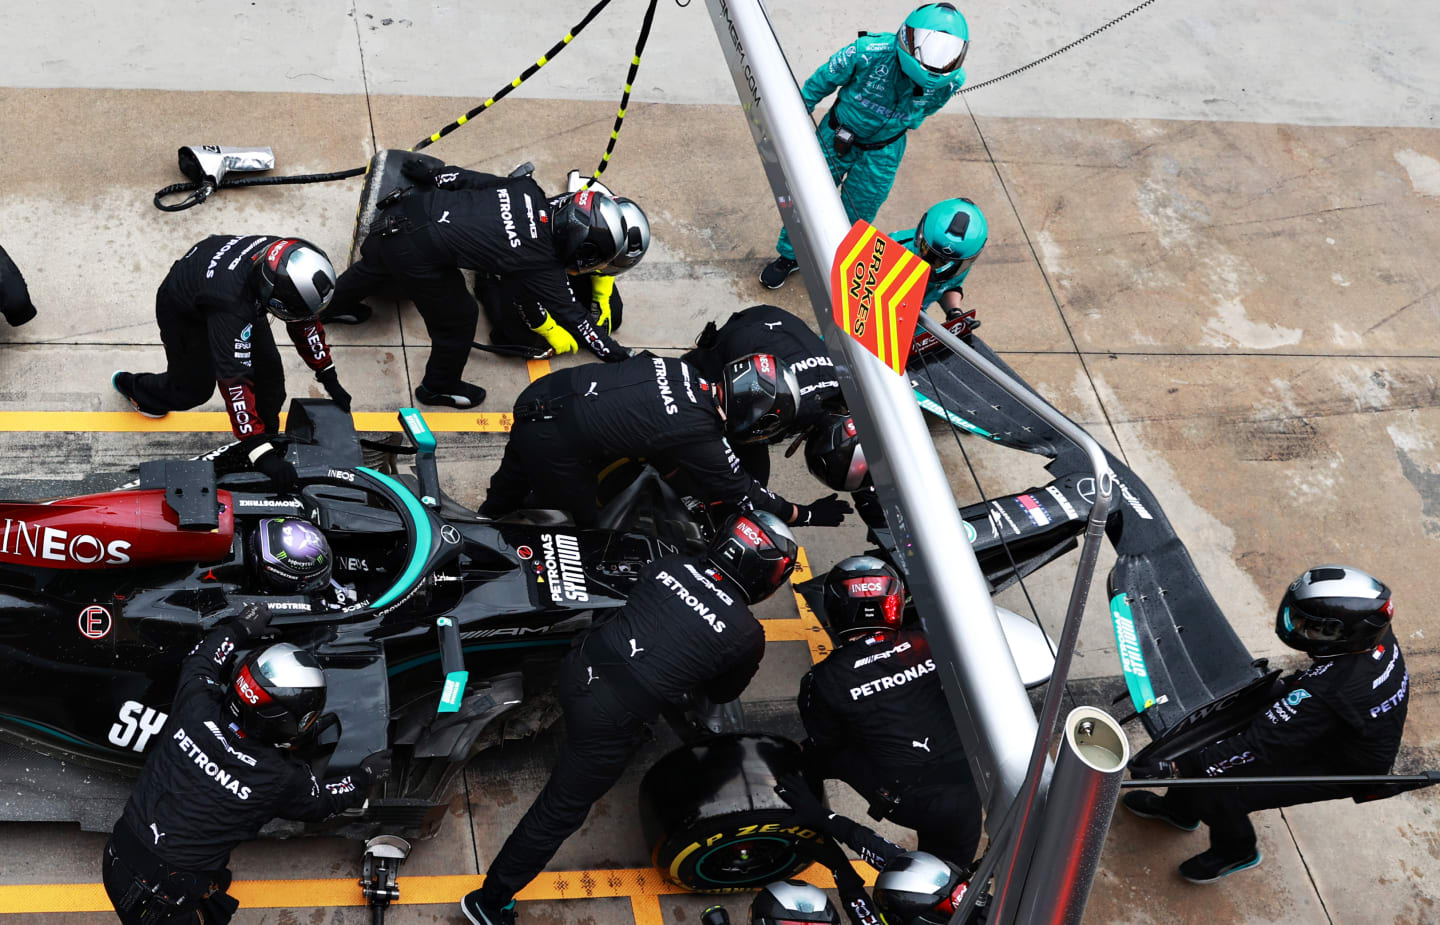 IMOLA, ITALY - APRIL 18: Lewis Hamilton of Great Britain driving the (44) Mercedes AMG Petronas F1 Team Mercedes W12 makes a pitstop for a new front wing following a crash during the F1 Grand Prix of Emilia Romagna at Autodromo Enzo e Dino Ferrari on April 18, 2021 in Imola, Italy. (Photo by Mark Thompson/Getty Images)